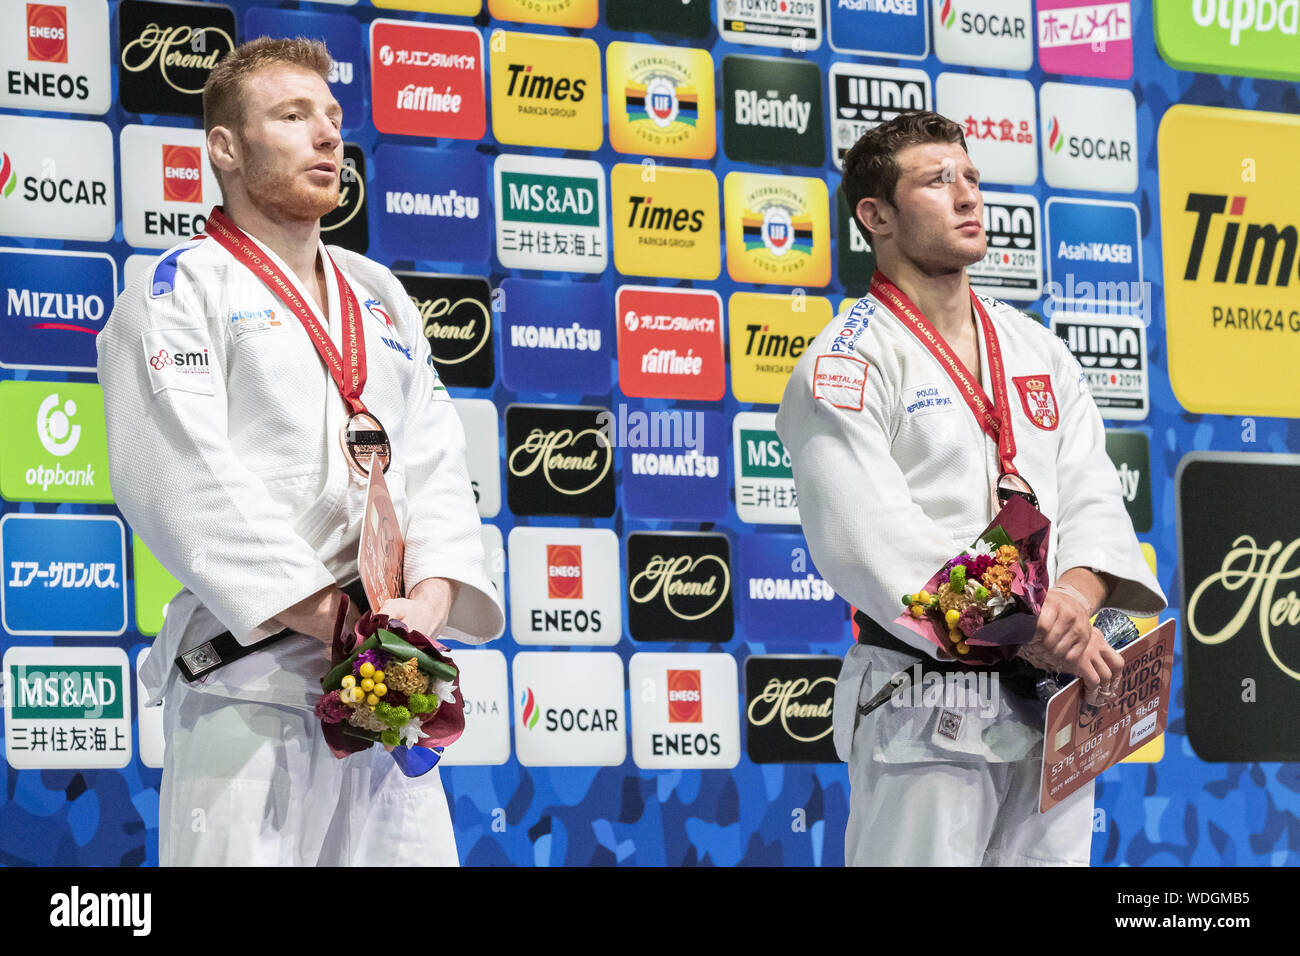 Tokyo, Japan. 29th Aug, 2019. (L to R) Bronze medalists Axel Clerget of France and Nemanja Majdov of Servia, pose for the cameras during the award ceremony of the men's -90kg category of the World Judo Championships Tokyo 2019 at Nippon Budokan. The World Judo Championships Tokyo 2019 is held from August 25 to September 1st. Credit: Rodrigo Reyes Marin/ZUMA Wire/Alamy Live News Stock Photo